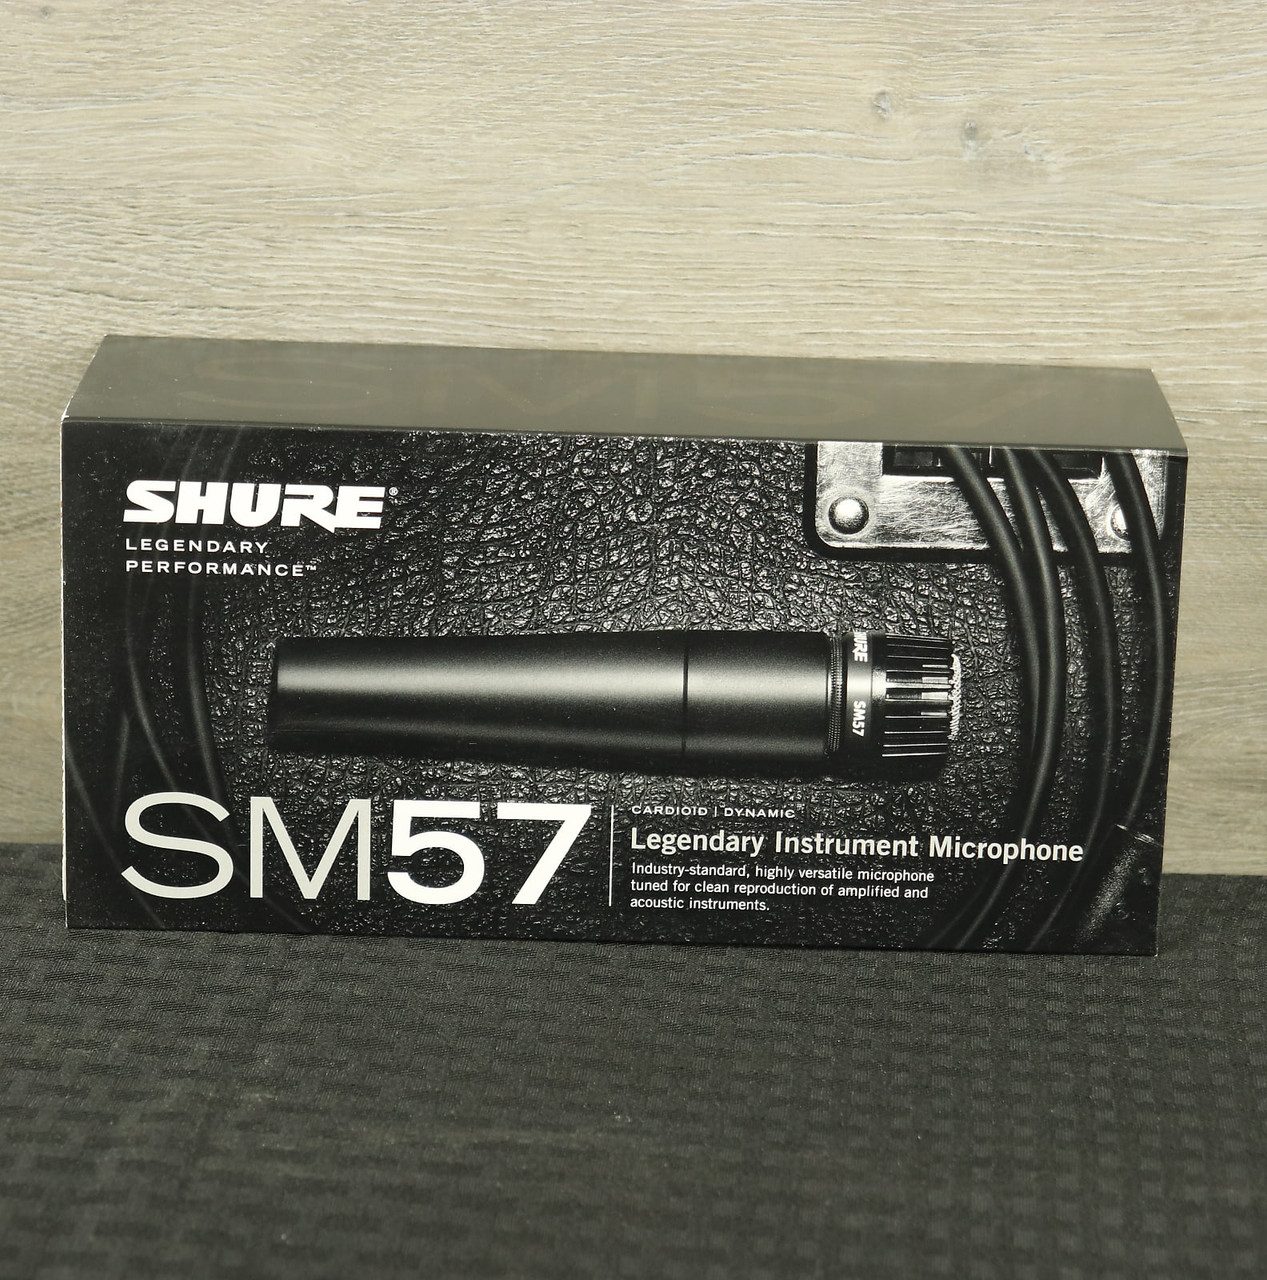 Shure SM57 Dynamic Microphone w Cardioid Pickup Pattern Vocal & Instrument  Mic